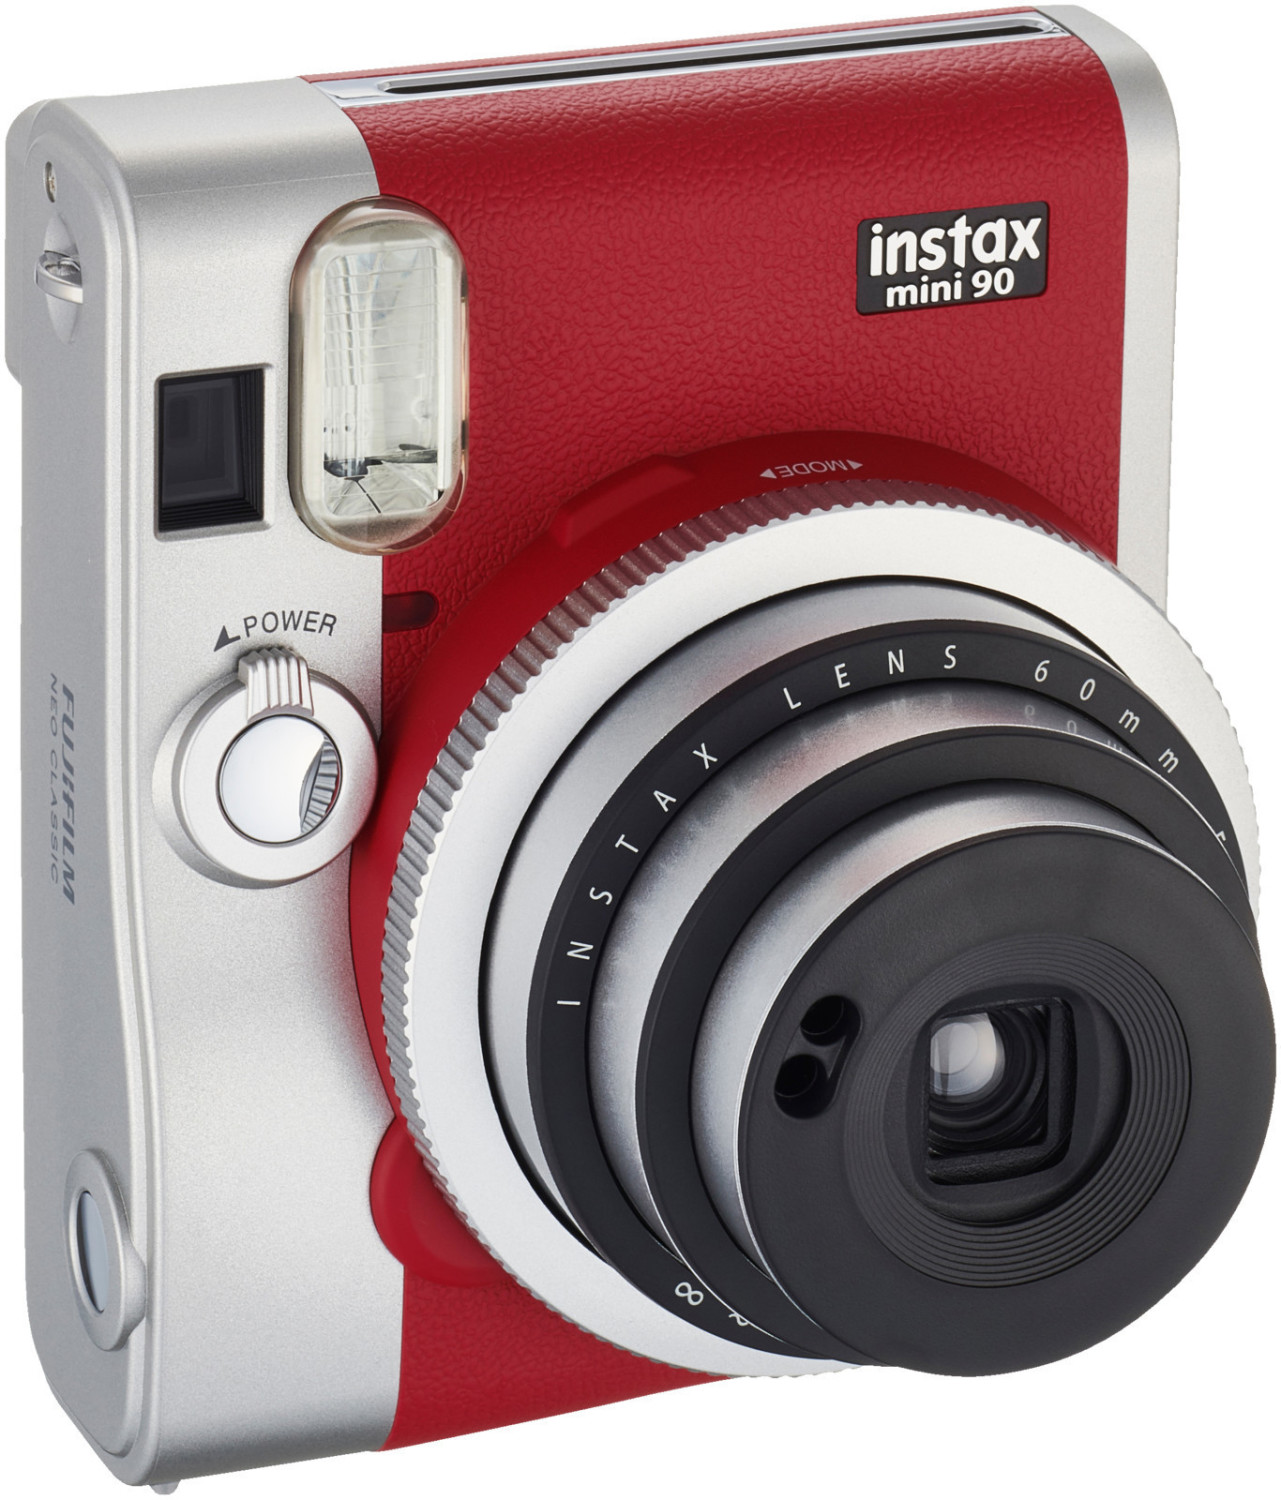 Buy Fujifilm Instax Mini 90 Neo Classic Red from £124.99 (Today